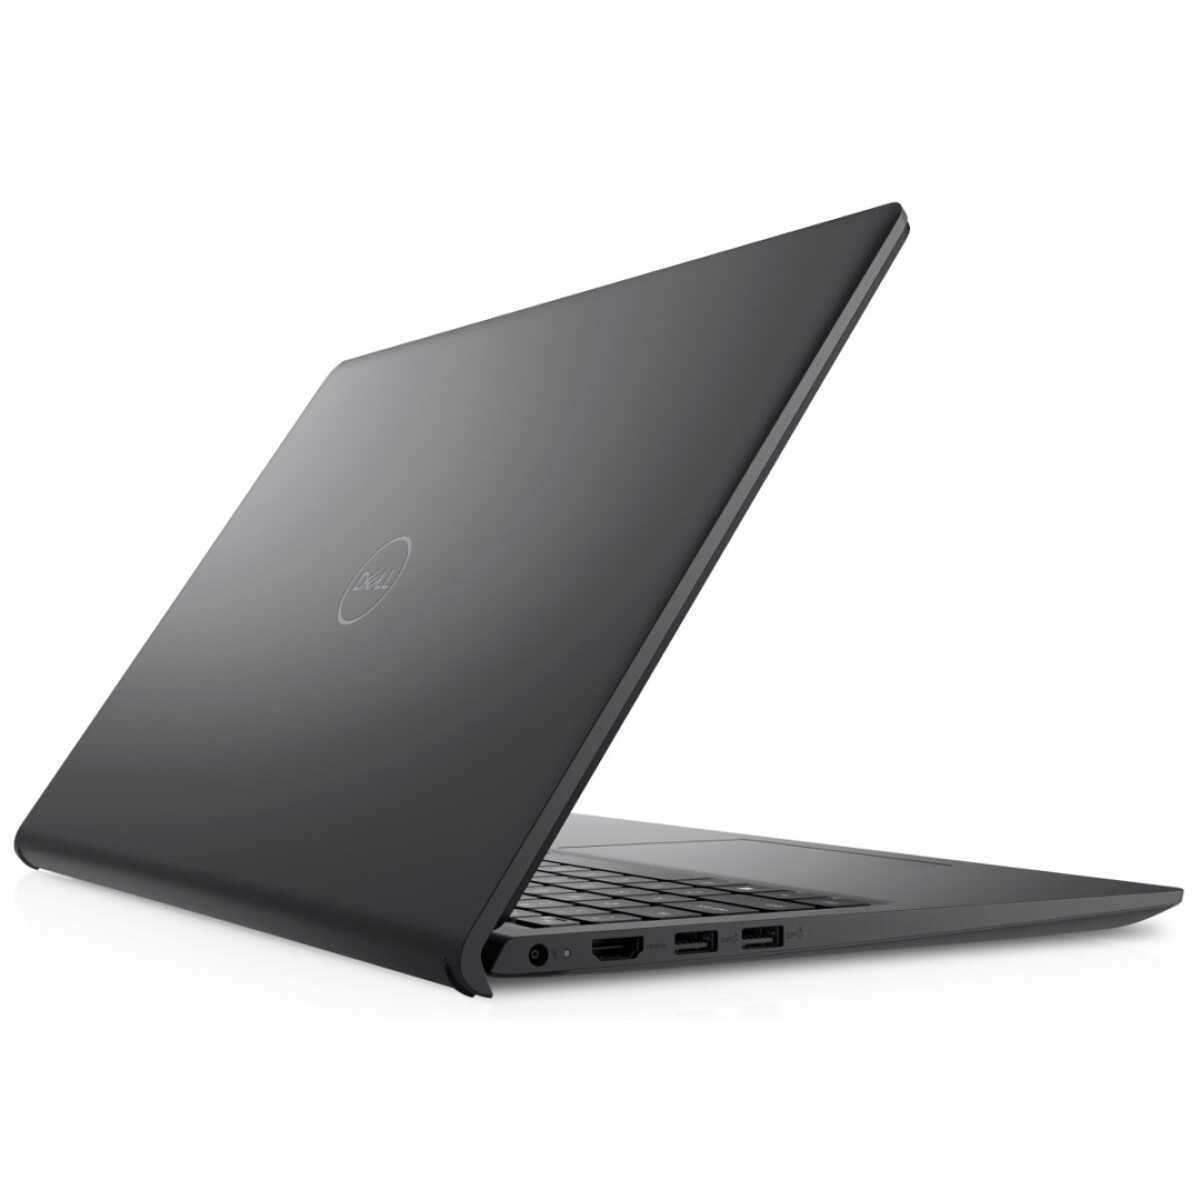 Notebook Dell Core I7 4.7GHZ, 16GB, 1TB Ssd, 15.6" Fhd 120HZ - 001 